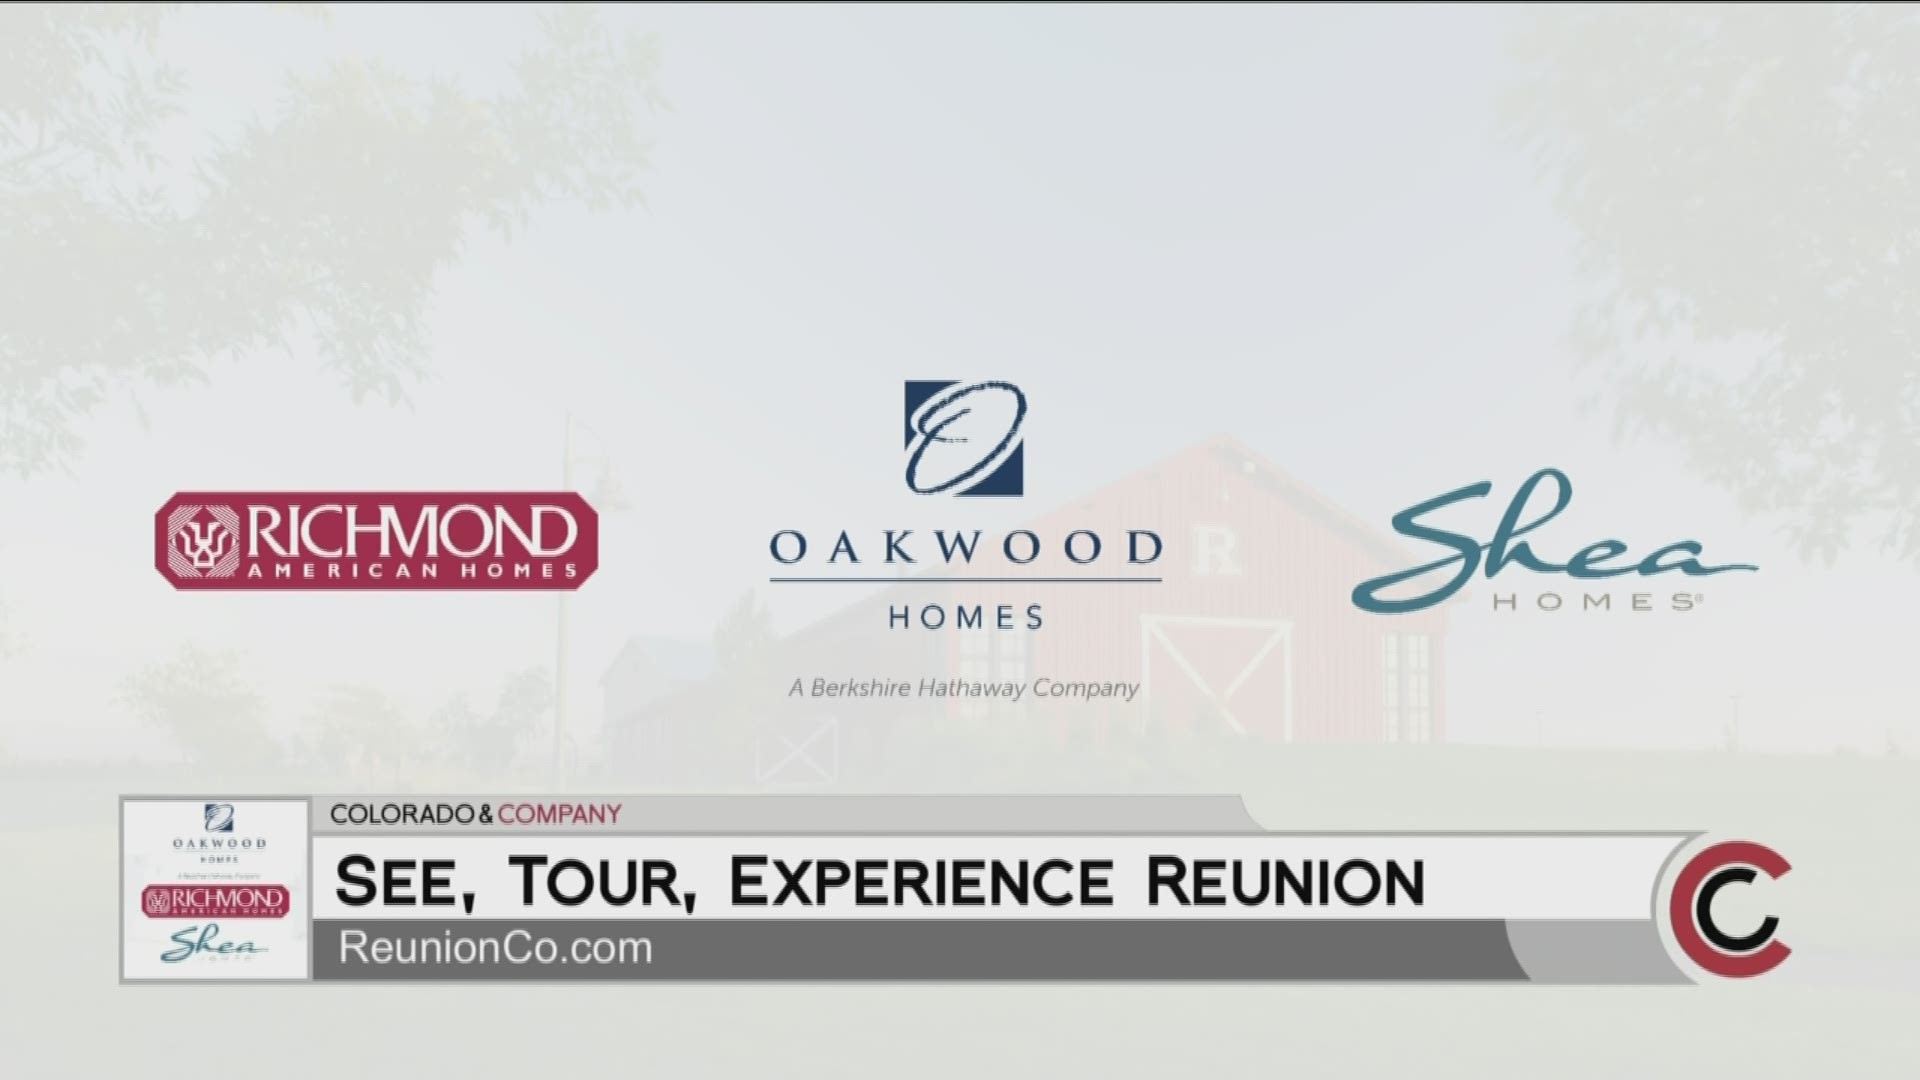 Learn more about the Reunion Master Planned Community at ReunionCO.com and take a tour of your potential future home!